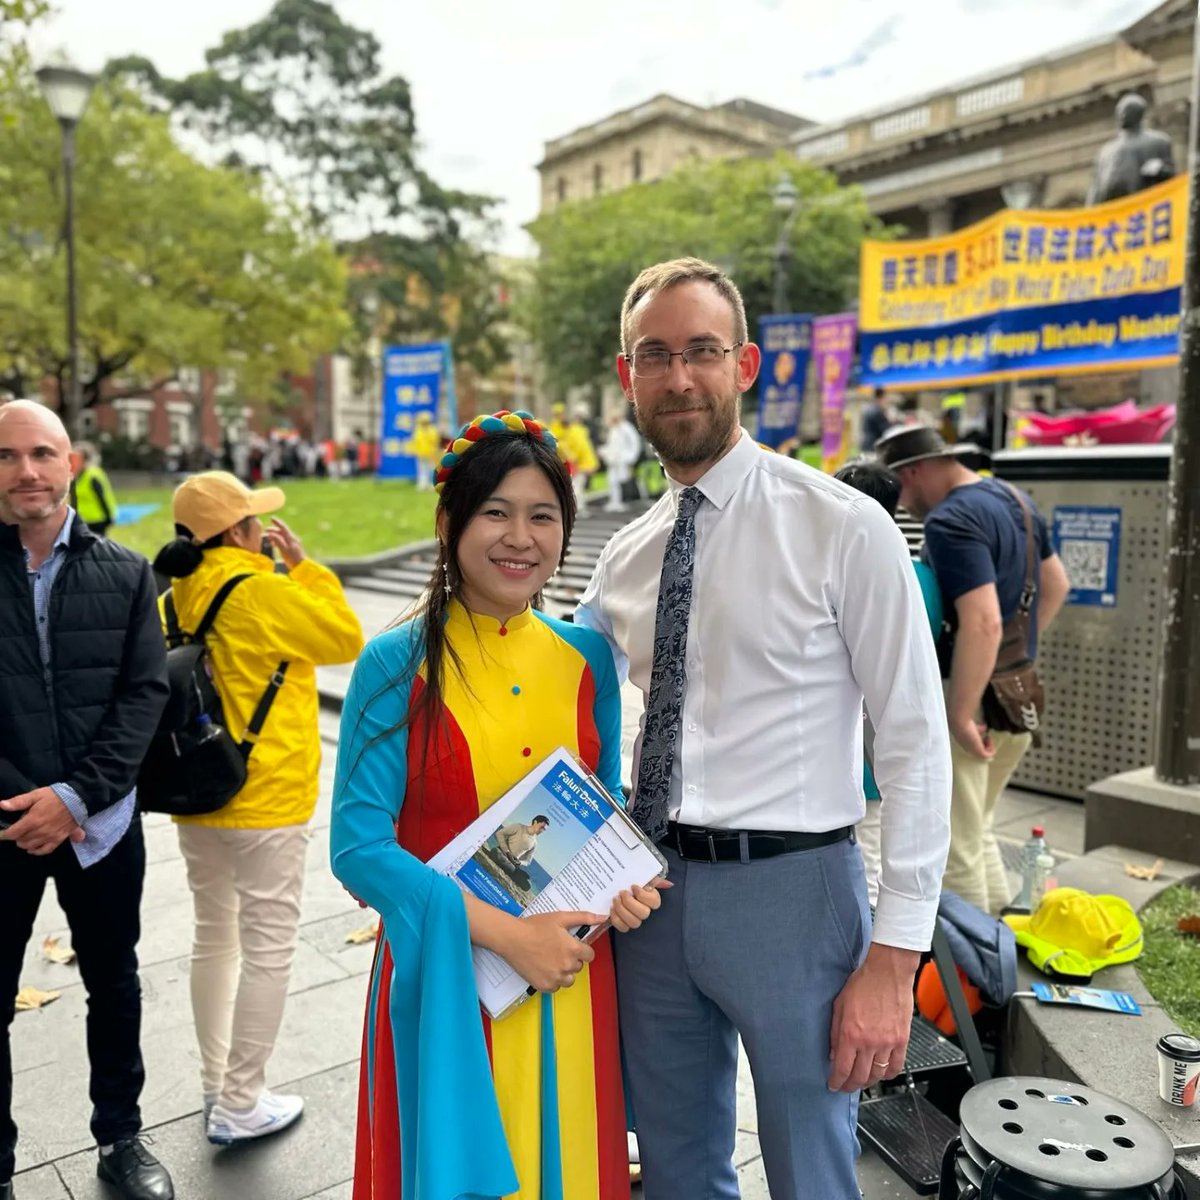 Today I attended World Falun Dafa Day at the invitation of David Limbrick MLC. It was wonderful to meet and listen to the practitioners of this way of life, who remain persecuted and oppressed in China.